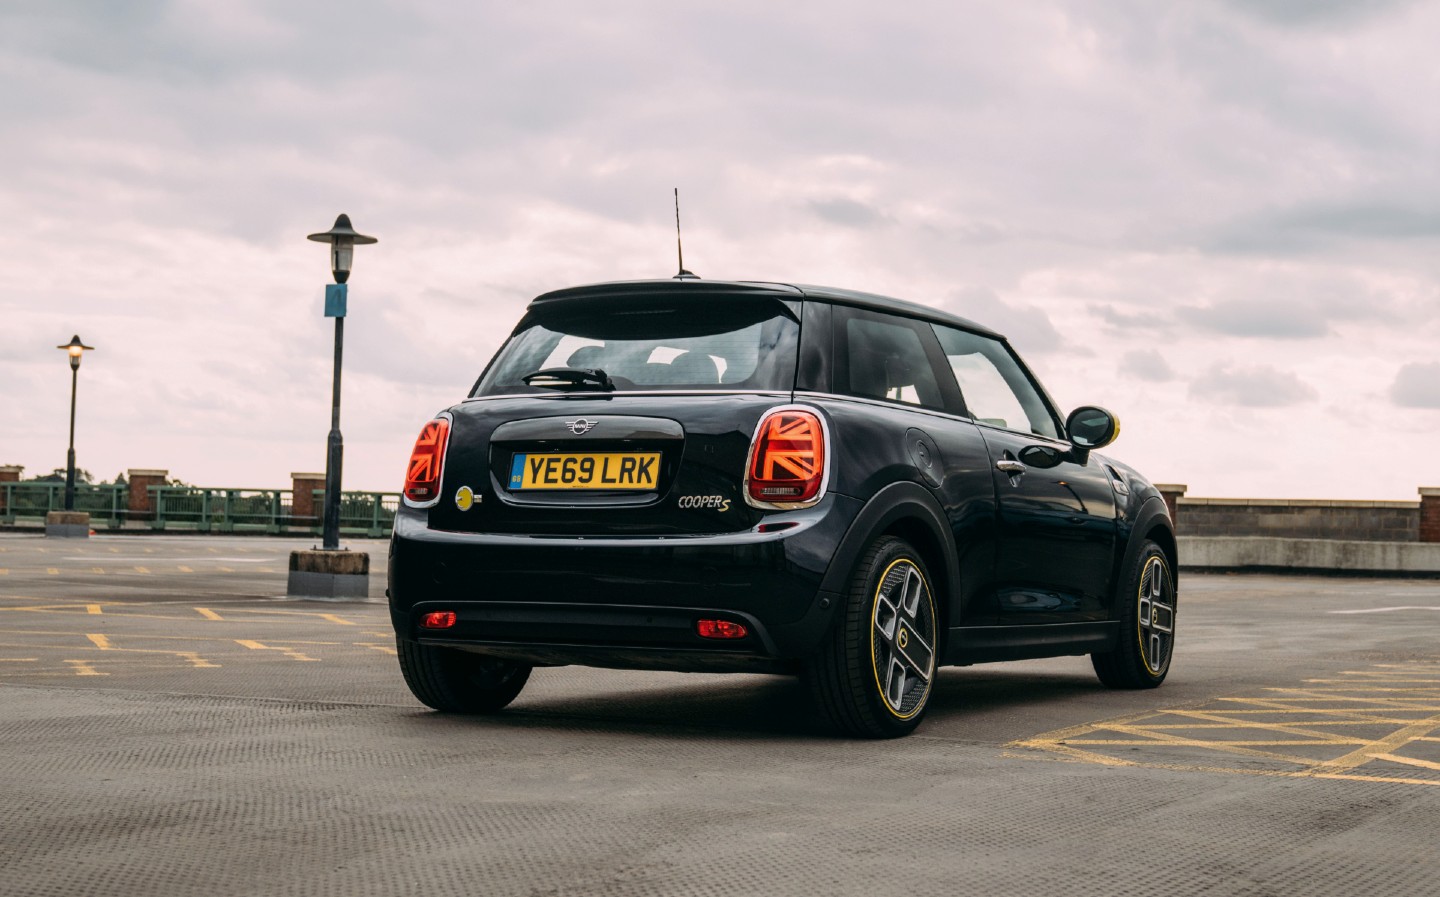 2020 Mini Electric long-term review by Will Dron for Sunday Times Driving.co.uk